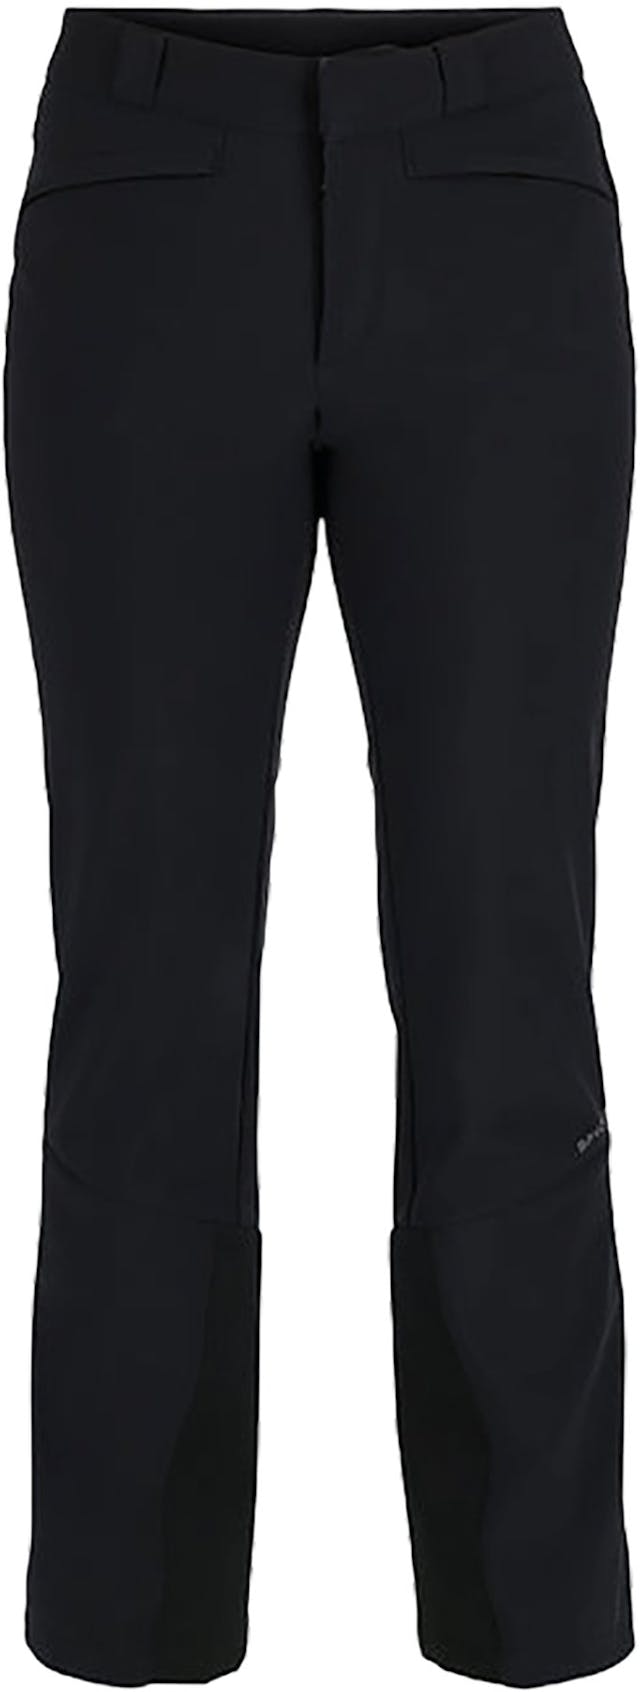 Product image for ORB Shell Pants - Women's